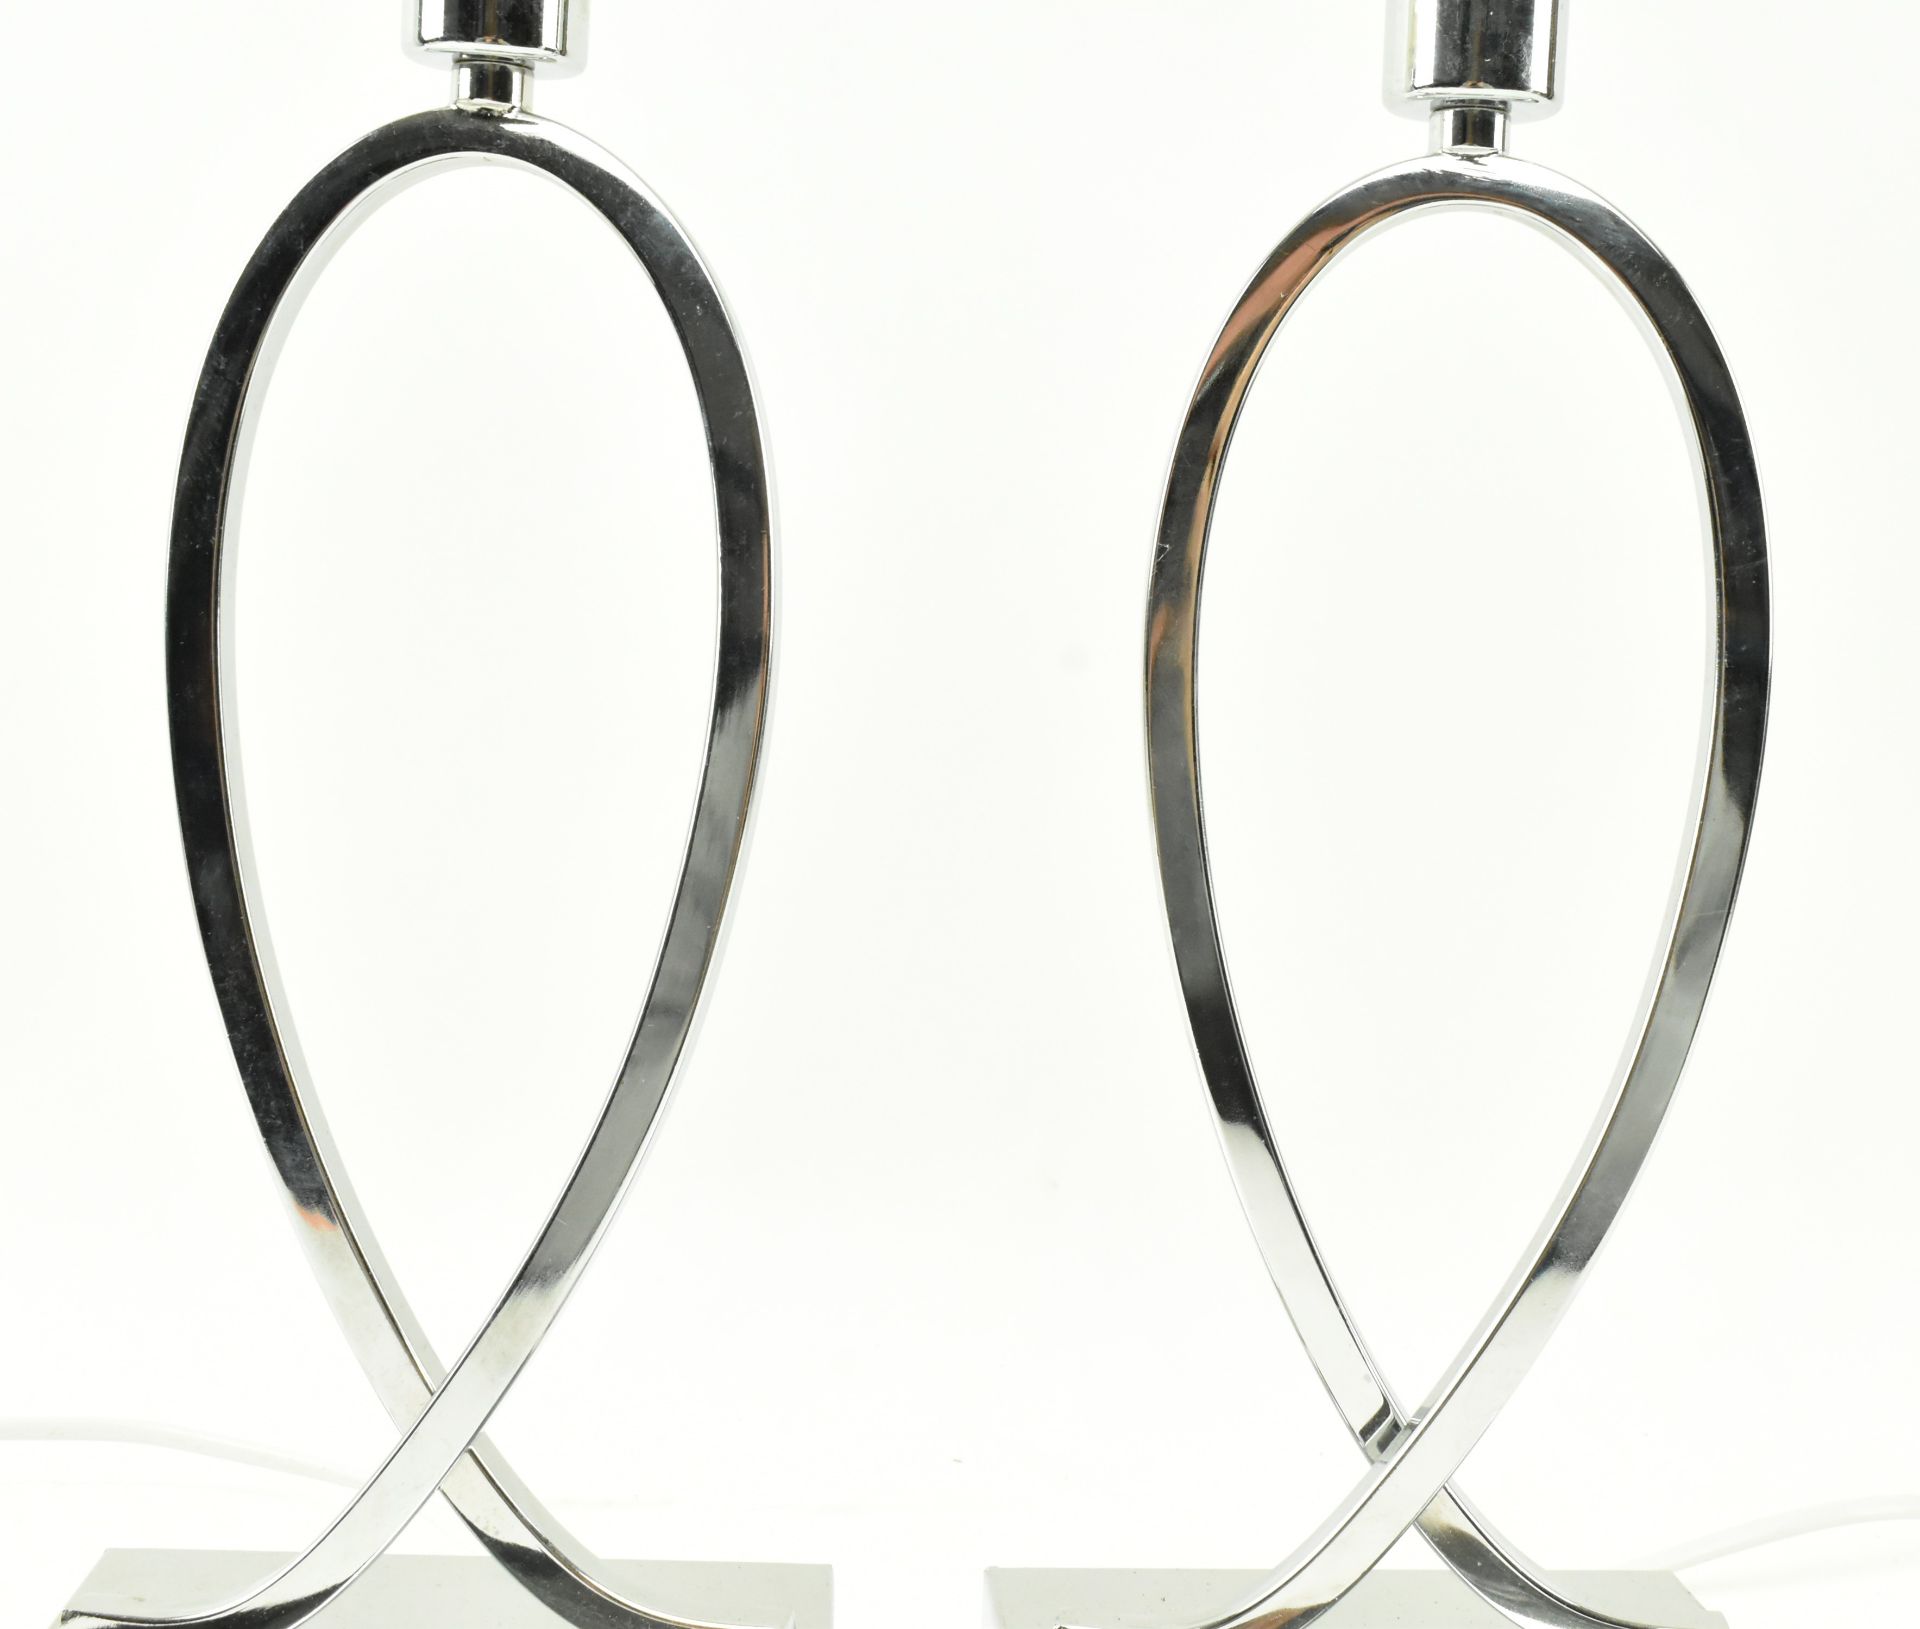 PAIR OF CONTEMPORARY HIGH END CHROME ABSTRACT DESK LAMPS - Image 3 of 5